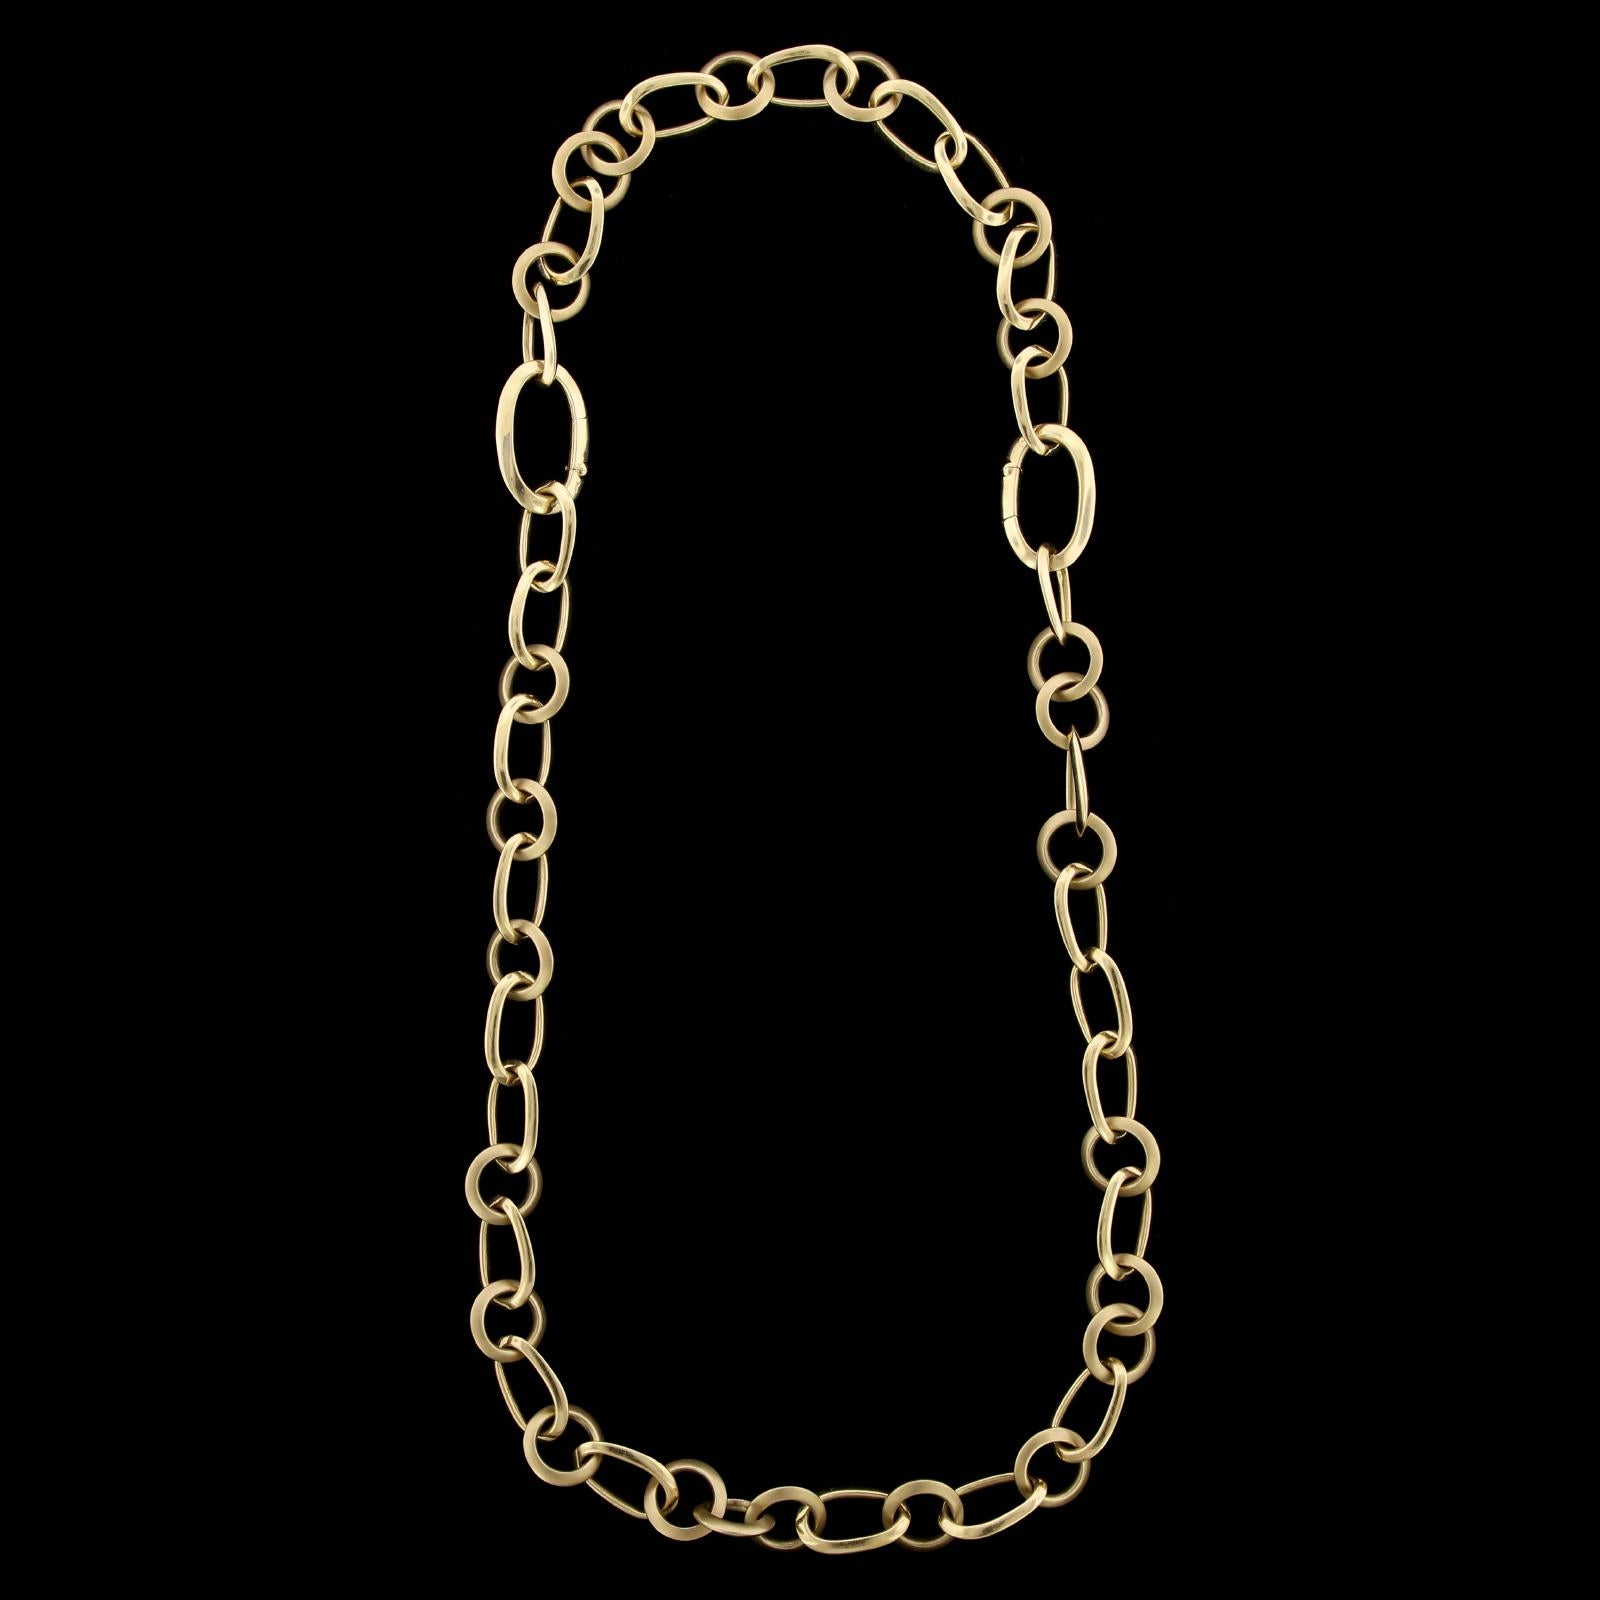 Pomellato 18K Yellow Gold Necklace and Bracelet. The convertible necklace and bracelet are
designed with oval and circular polished and textured links, necklace 19